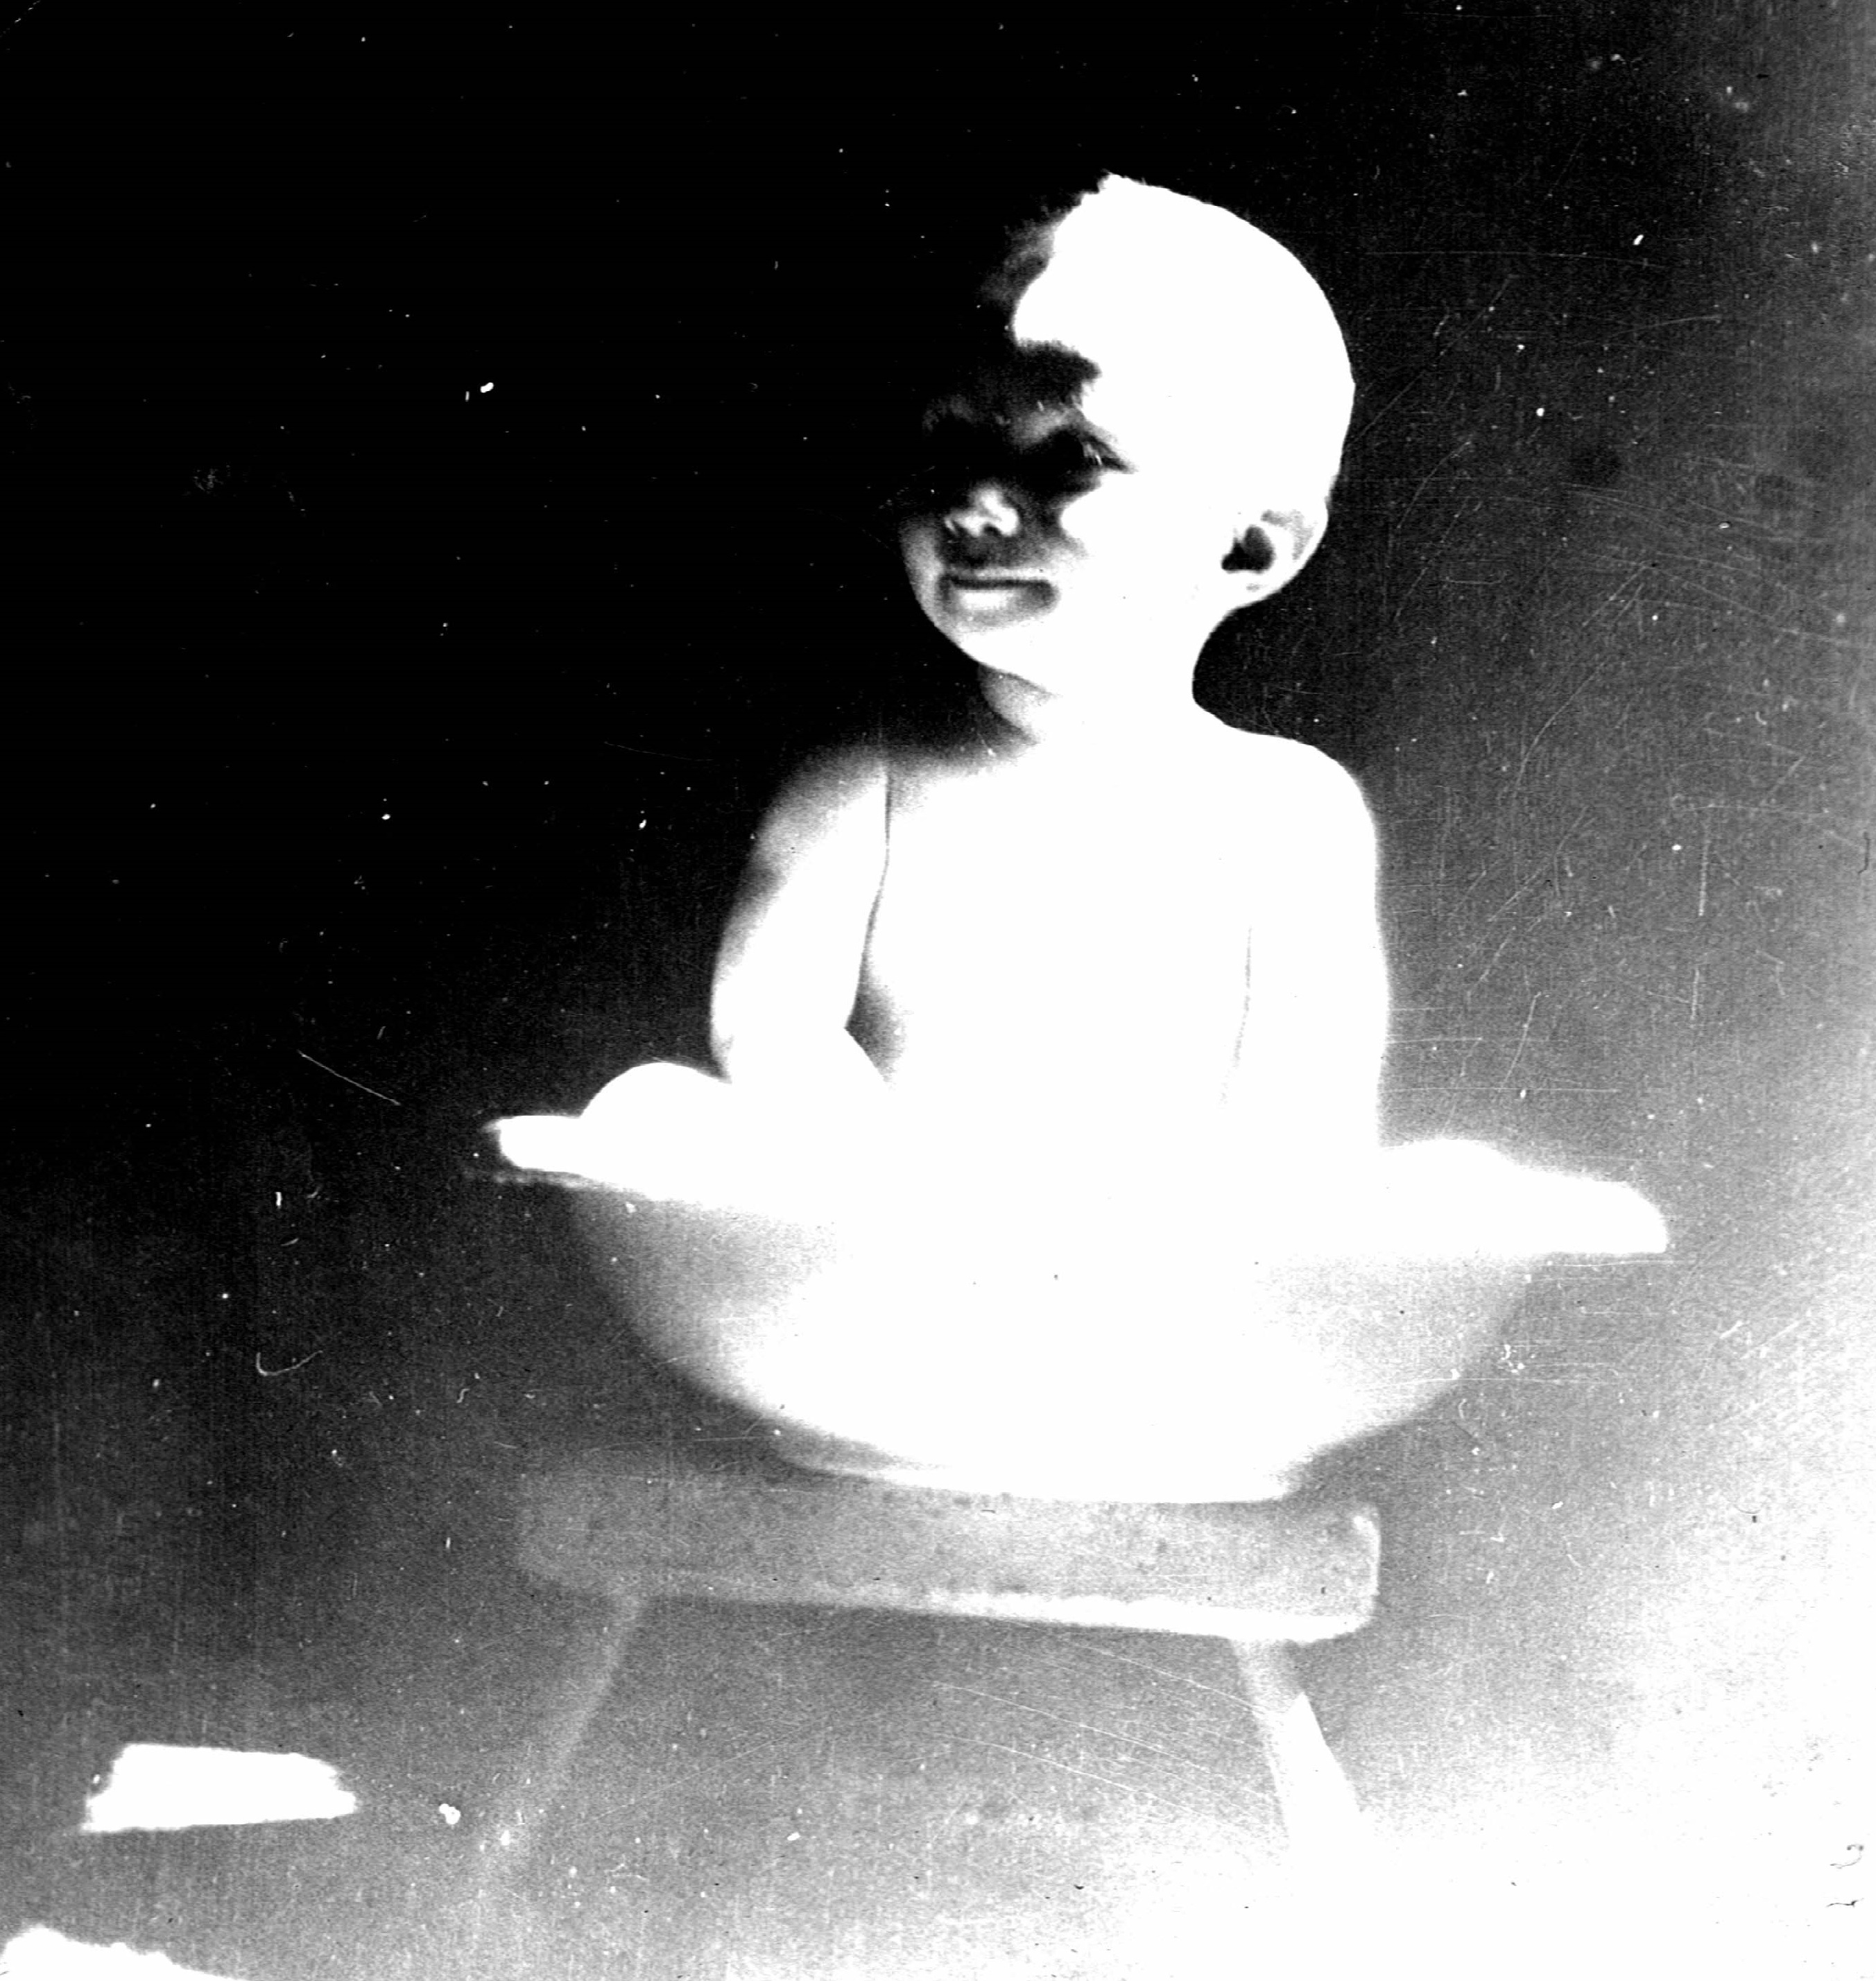 Photo of Walter Thompson, Jr. bathing on a wash stand